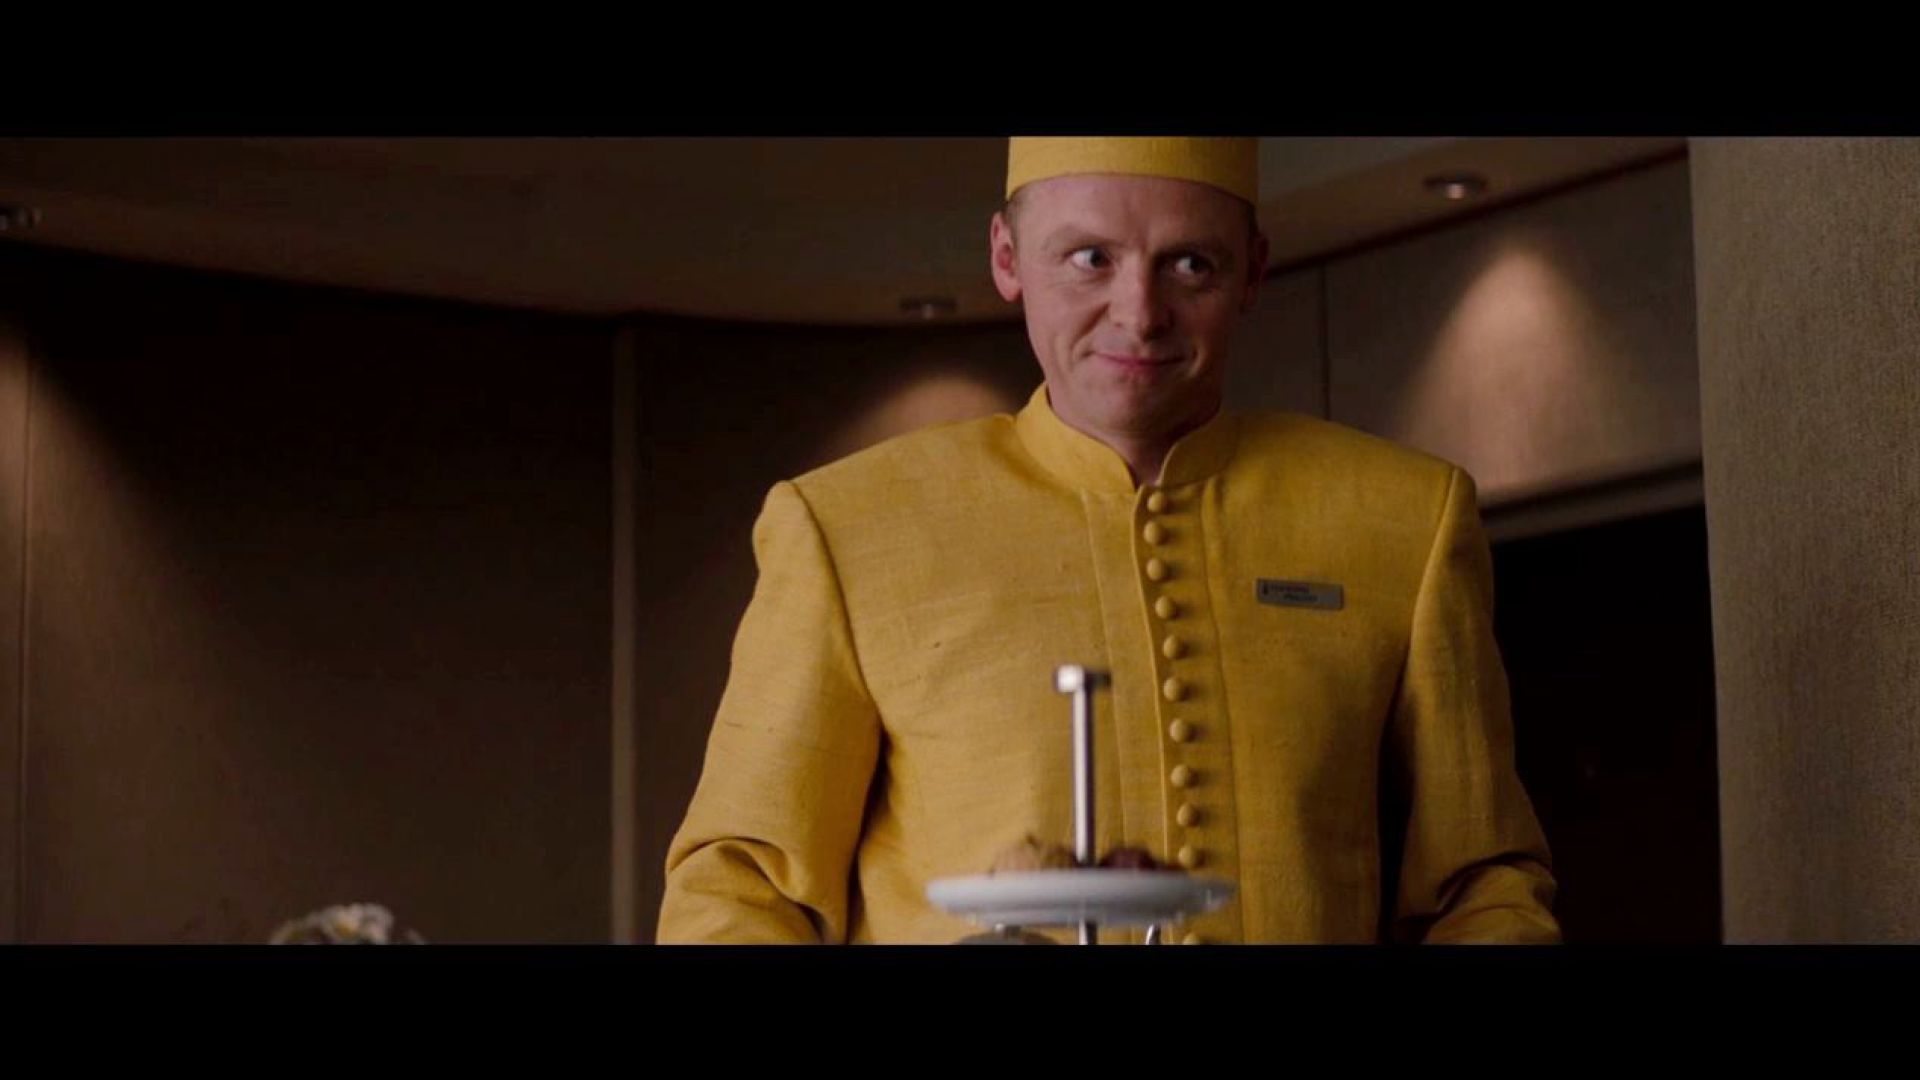 Simon Pegg on playing the monkey from Aladdin in Mission: Impossible 4